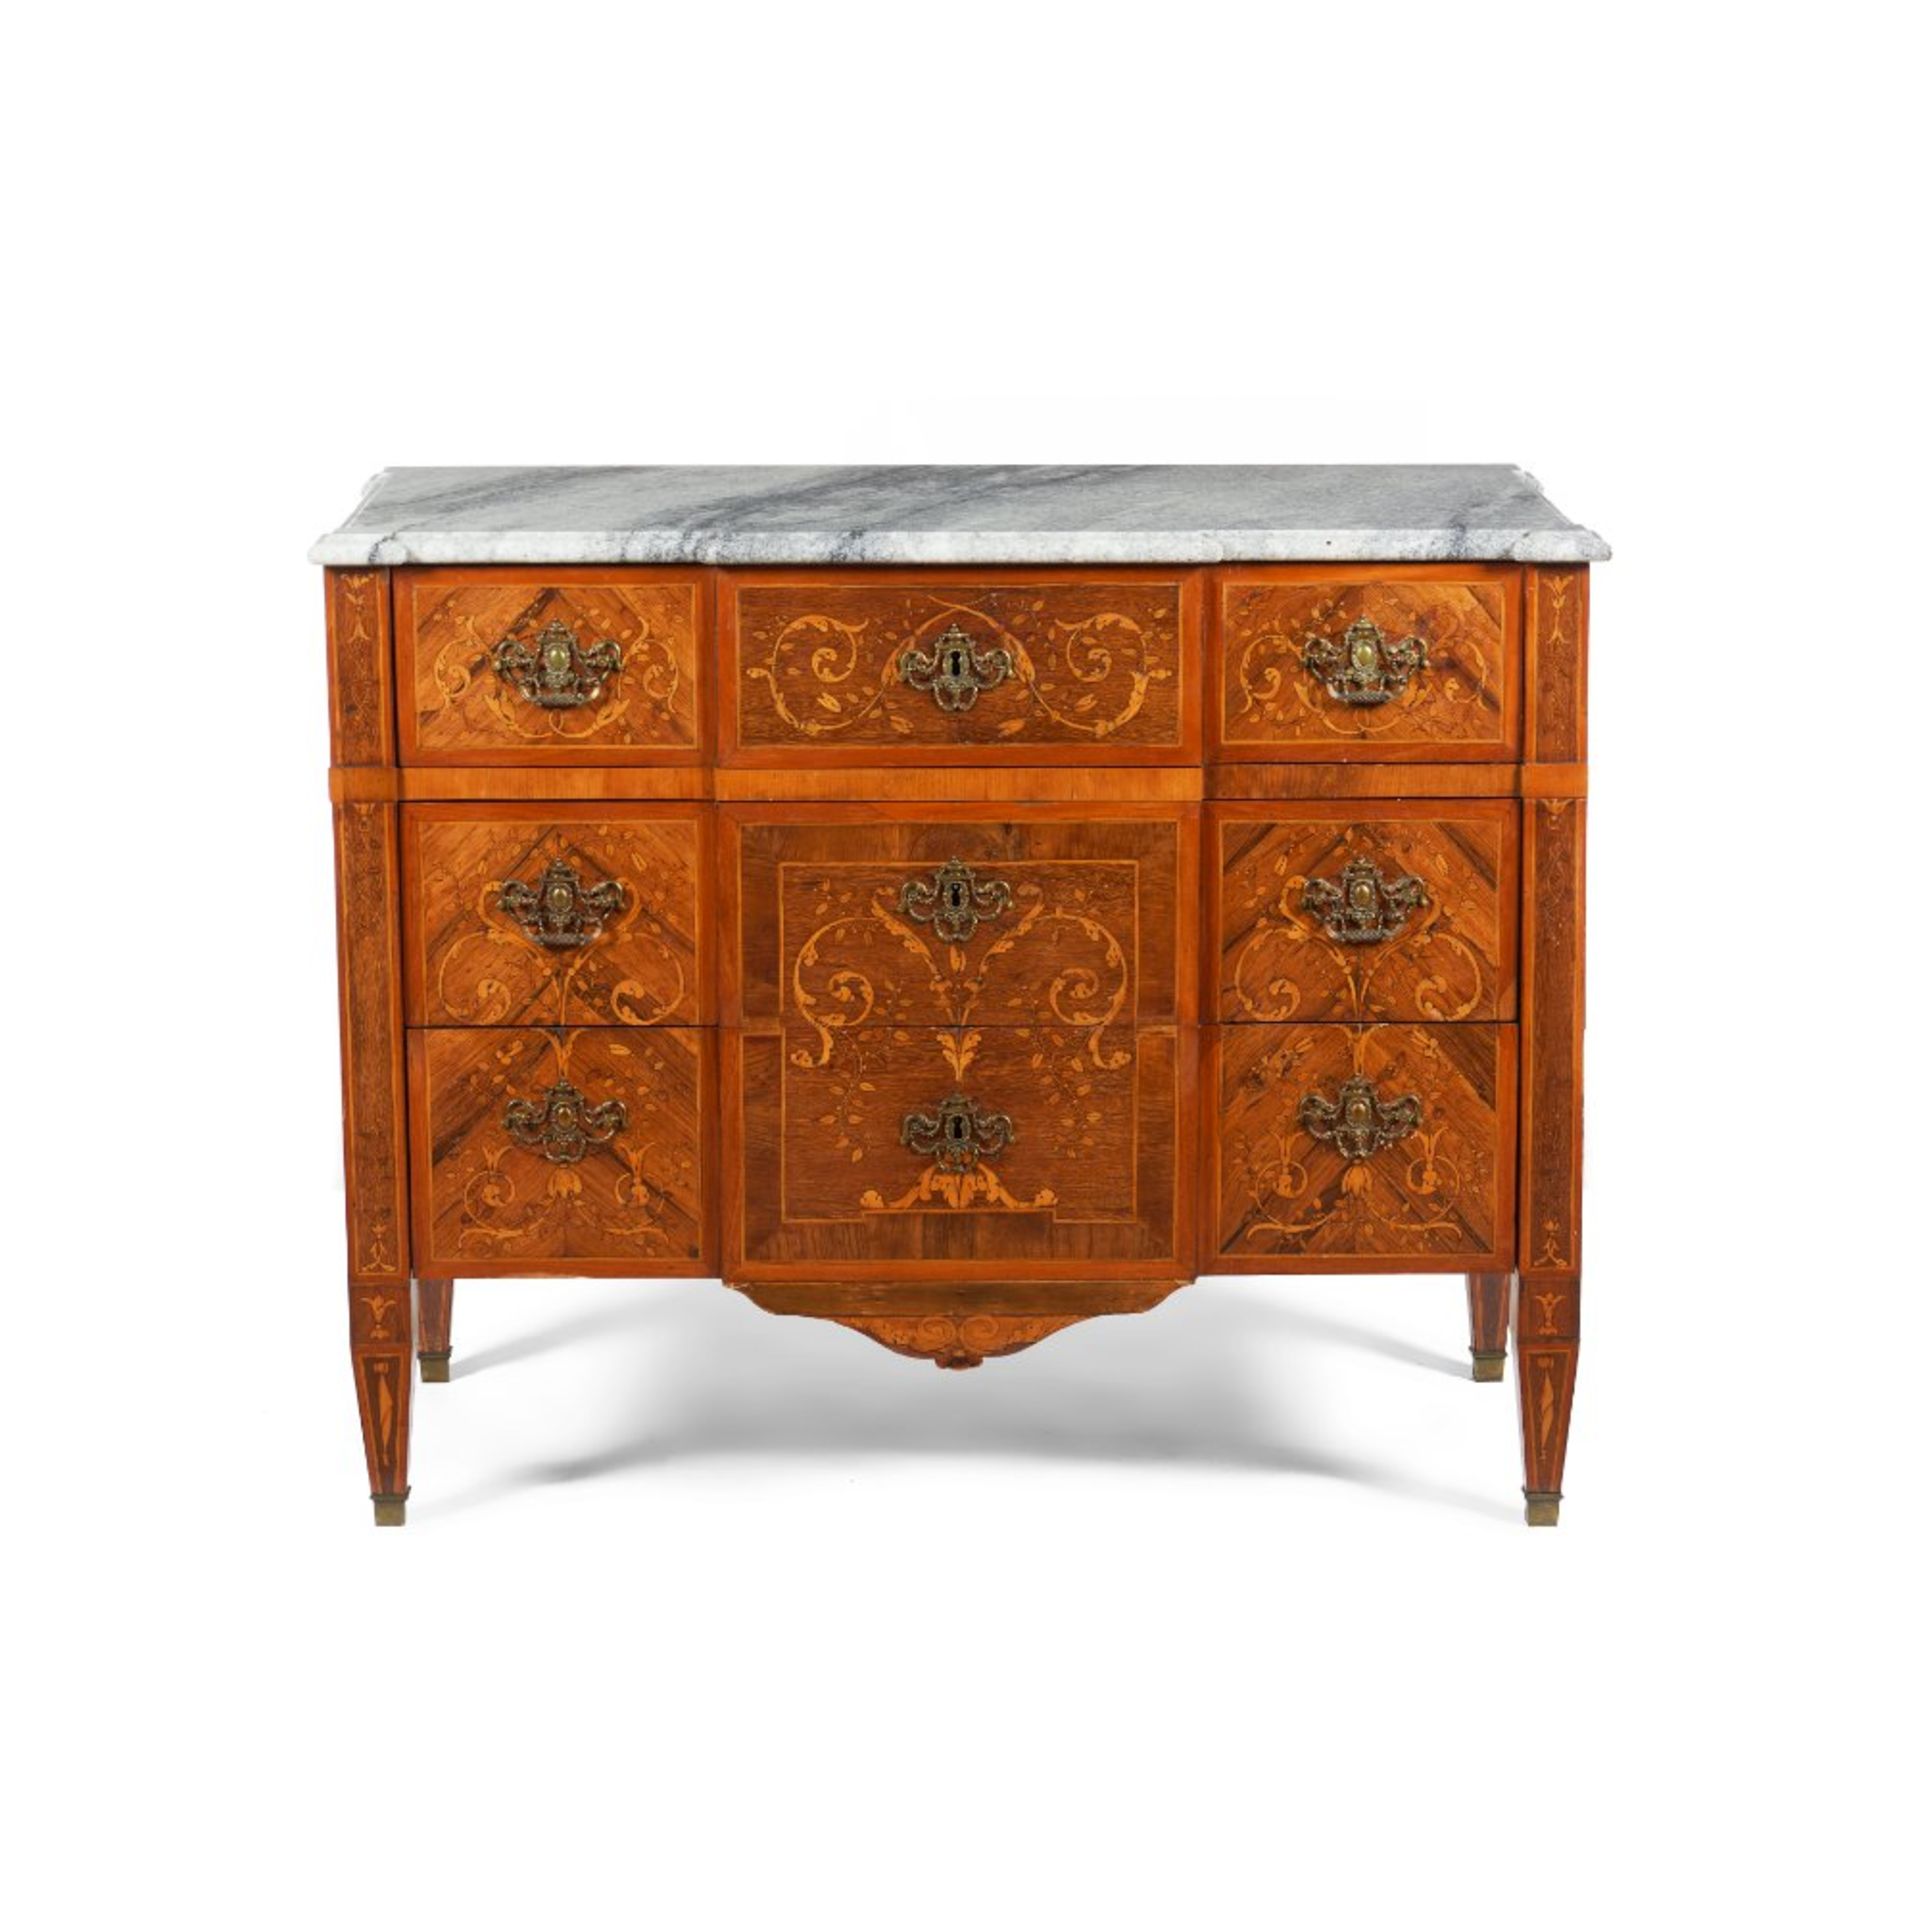 A D. Maria chest of drawers - Image 2 of 2